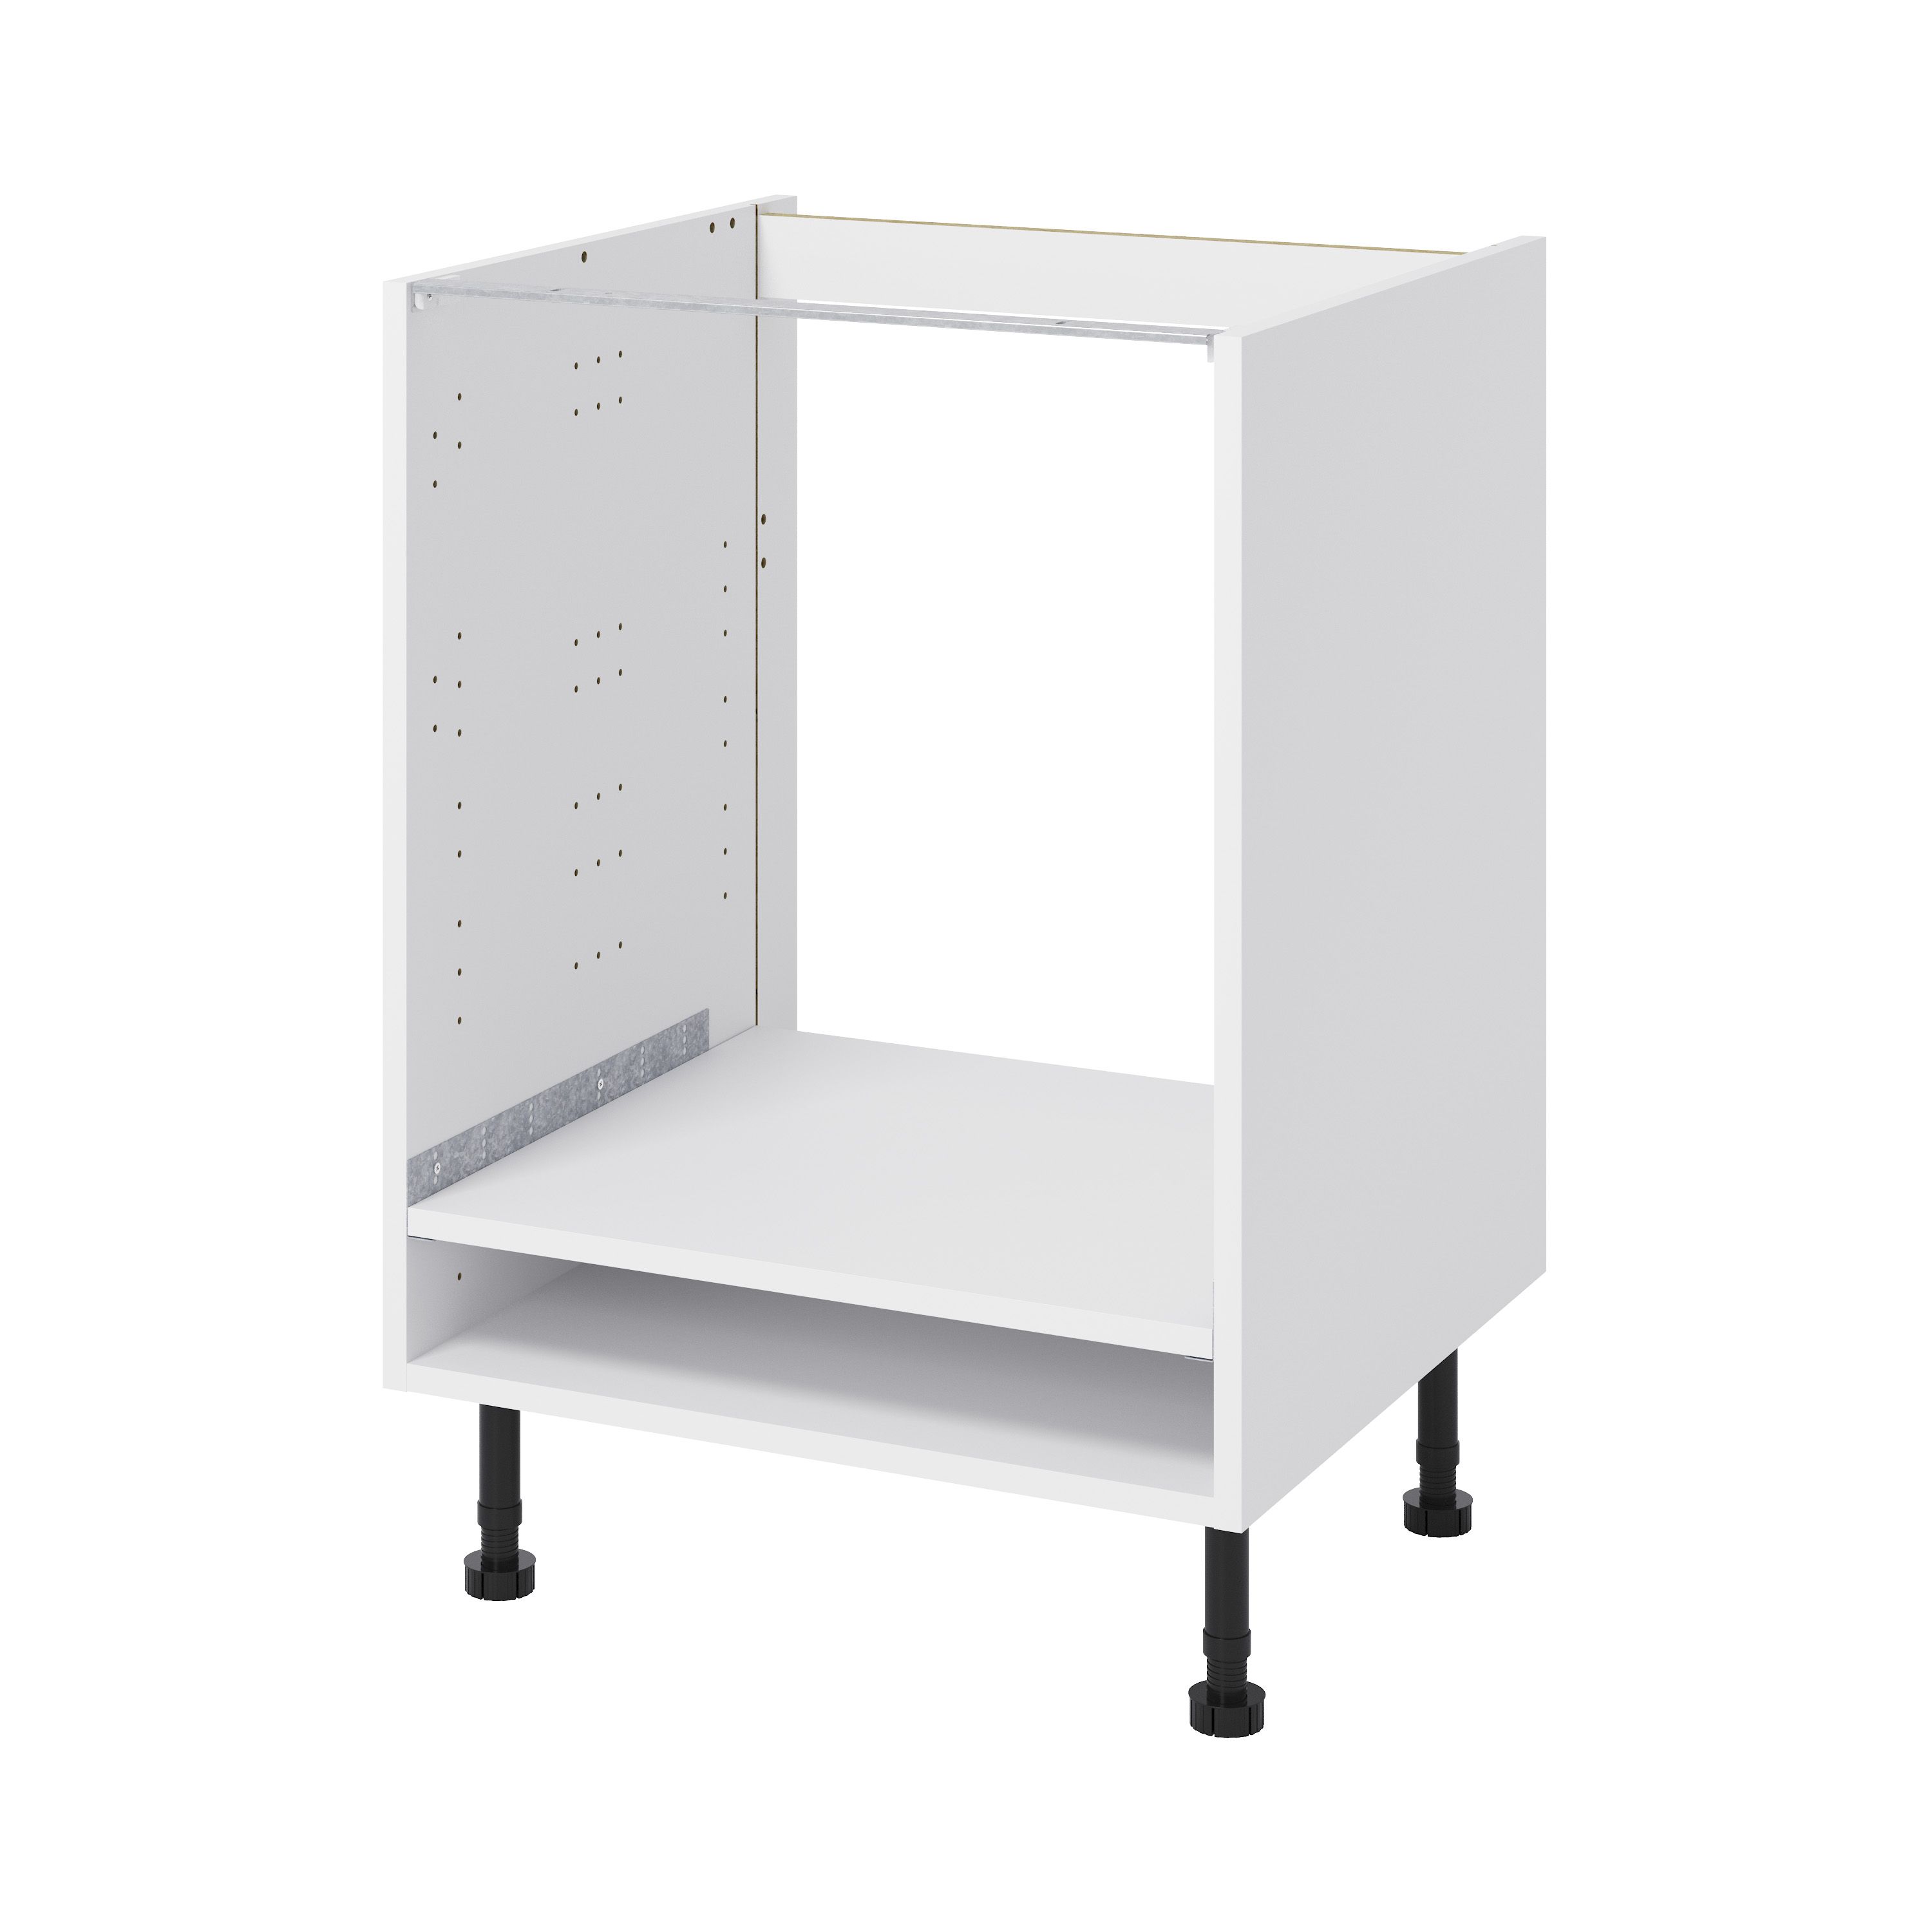 Goodhome Caraway White Oven Housing Base Cabinet W 600mm